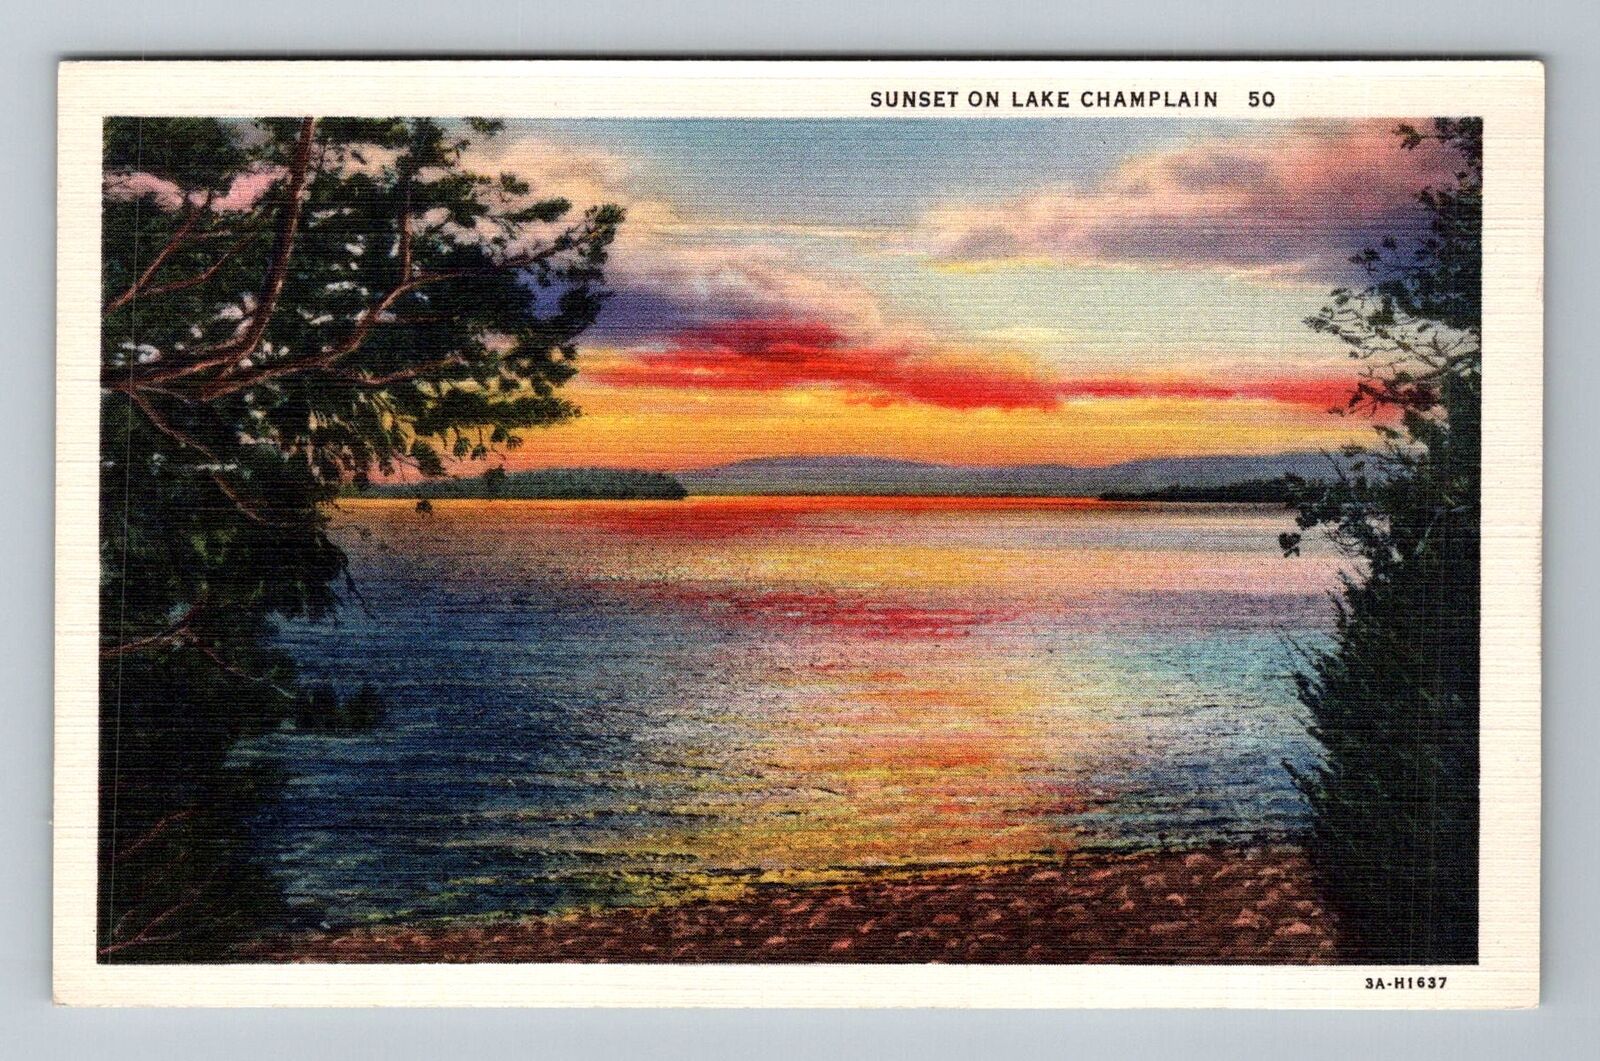 VT-Vermont or NY-New York Lake Champlain At Sunset Colorful Sky Vintage Postcard